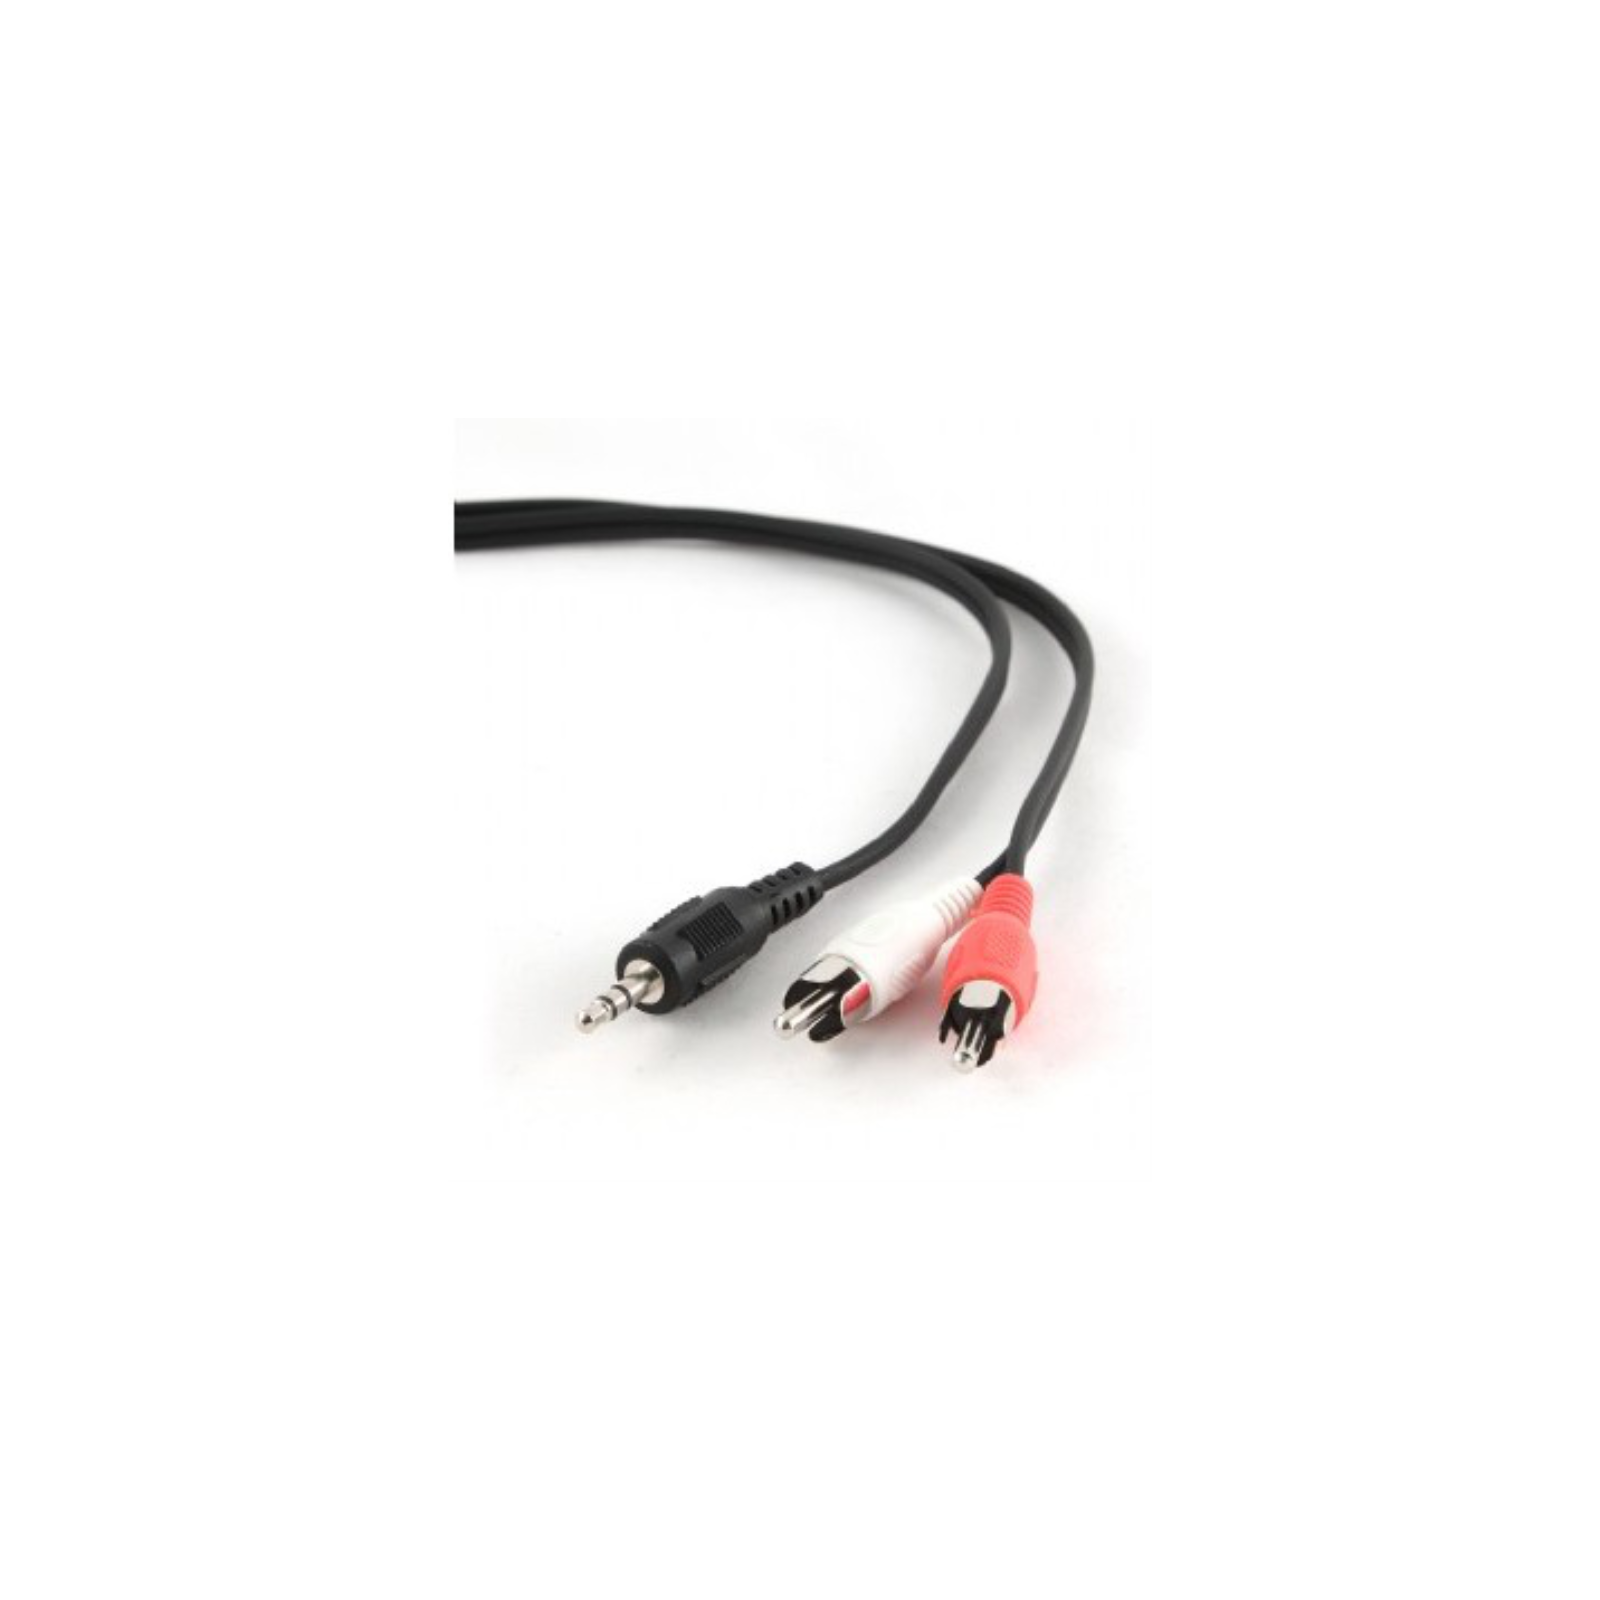 CABLE AUDIO GEMBIRD CONECTOR 35MM A RCA 5M